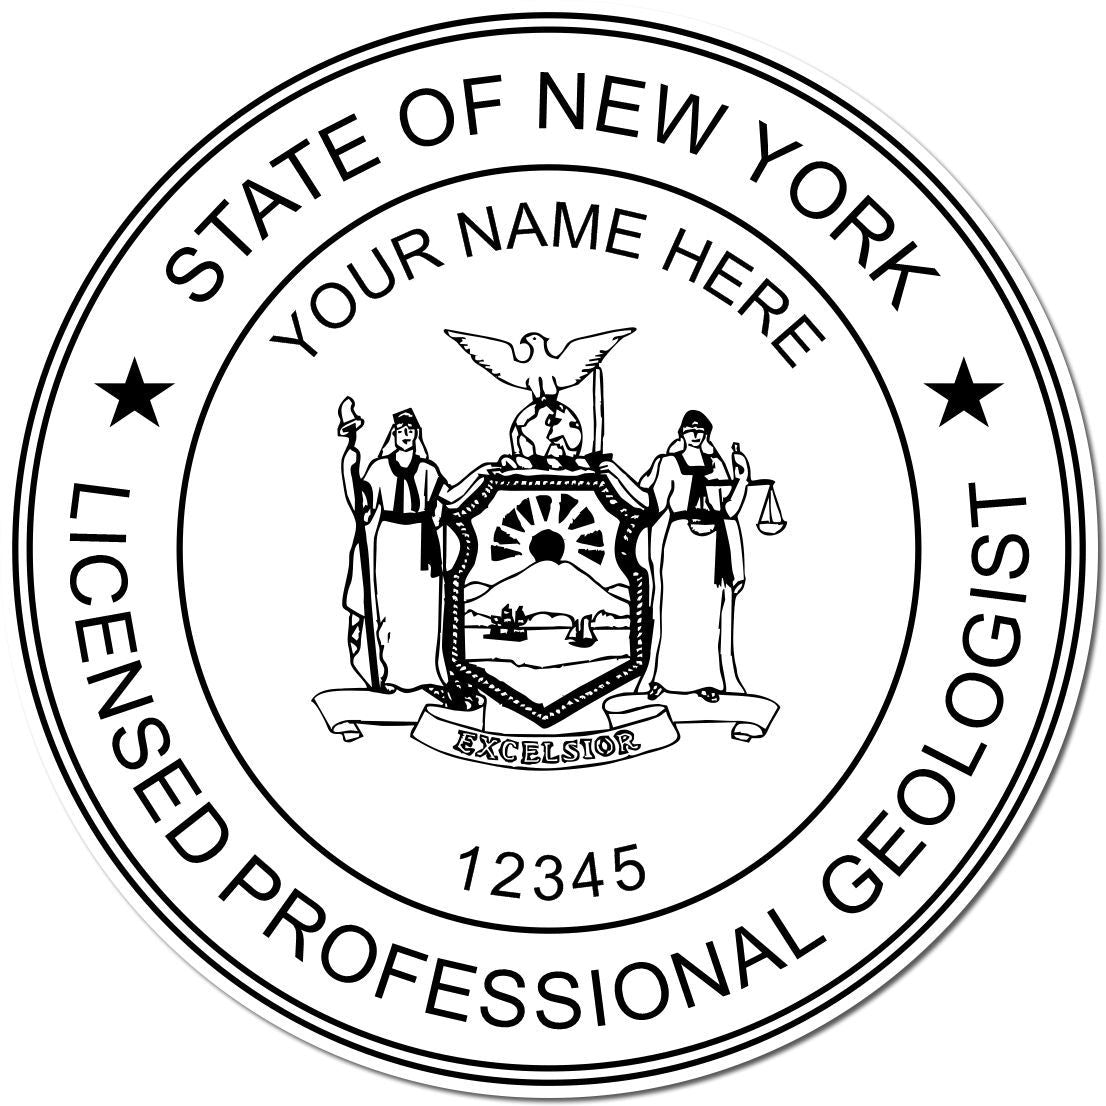 This paper is stamped with a sample imprint of the Digital New York Geologist Stamp, Electronic Seal for New York Geologist, signifying its quality and reliability.